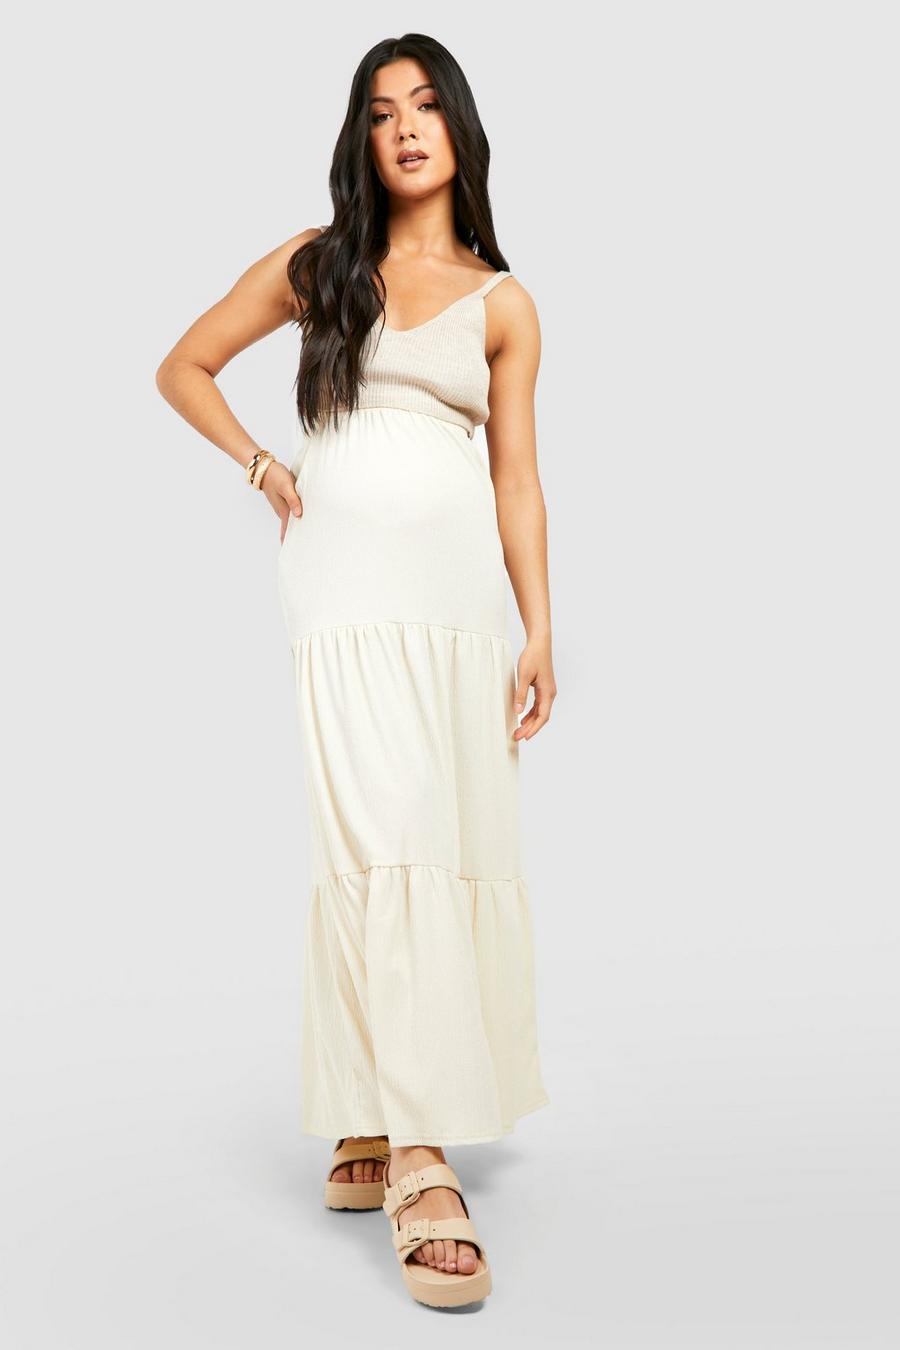 Ivory white Maternity Textured Tiered Maxi Skirt